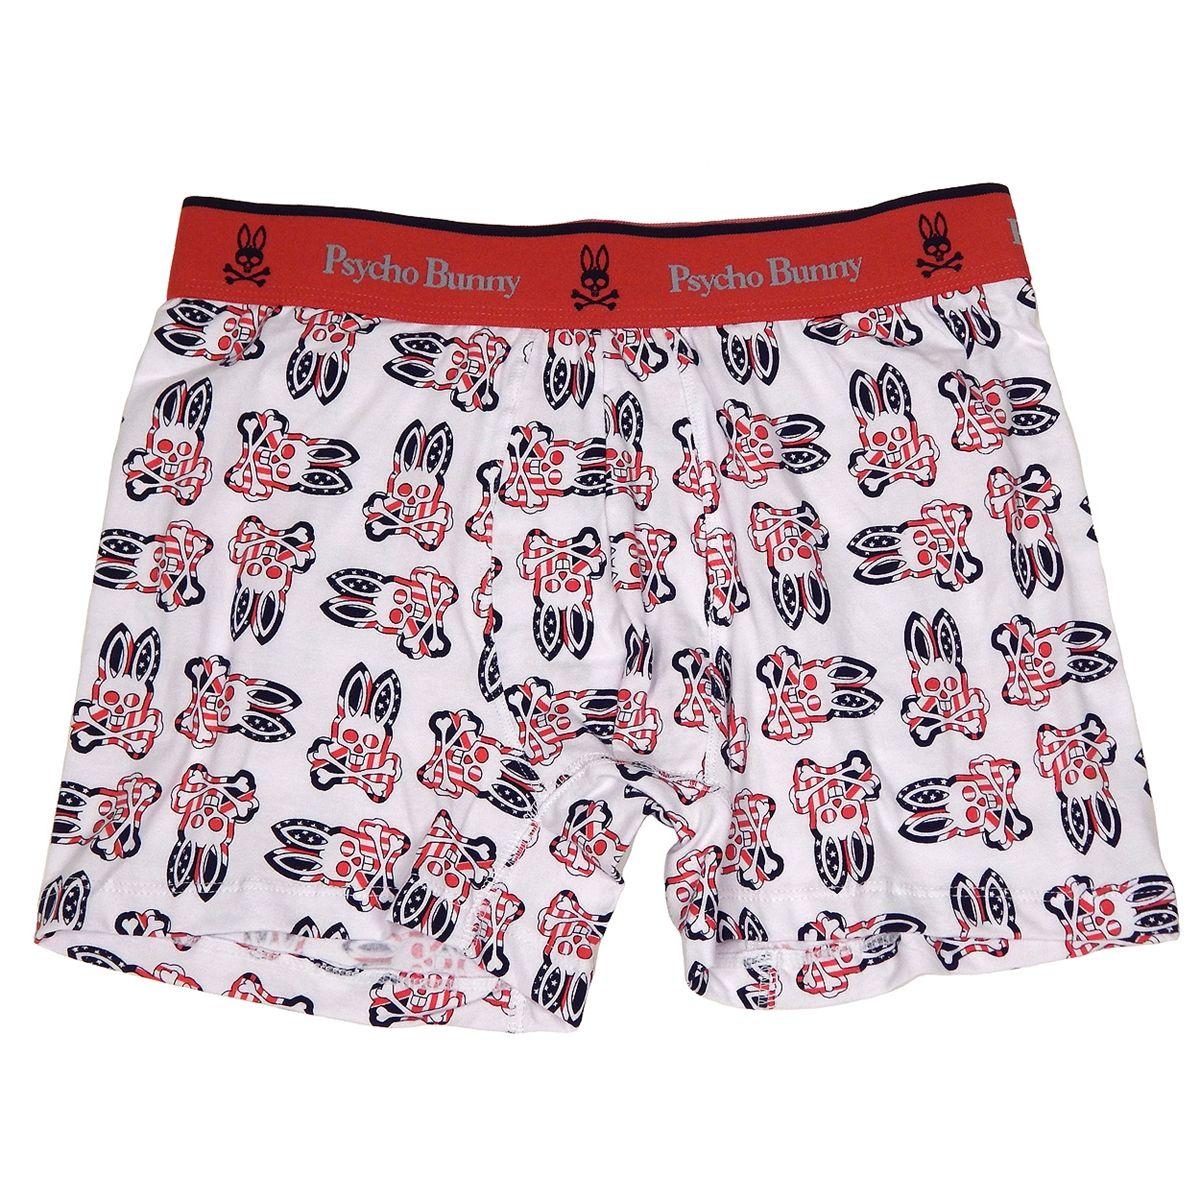 Red White and Blue Patriot Logo - Men's Psycho Bunny Tagless Boxer Briefs in Red, White